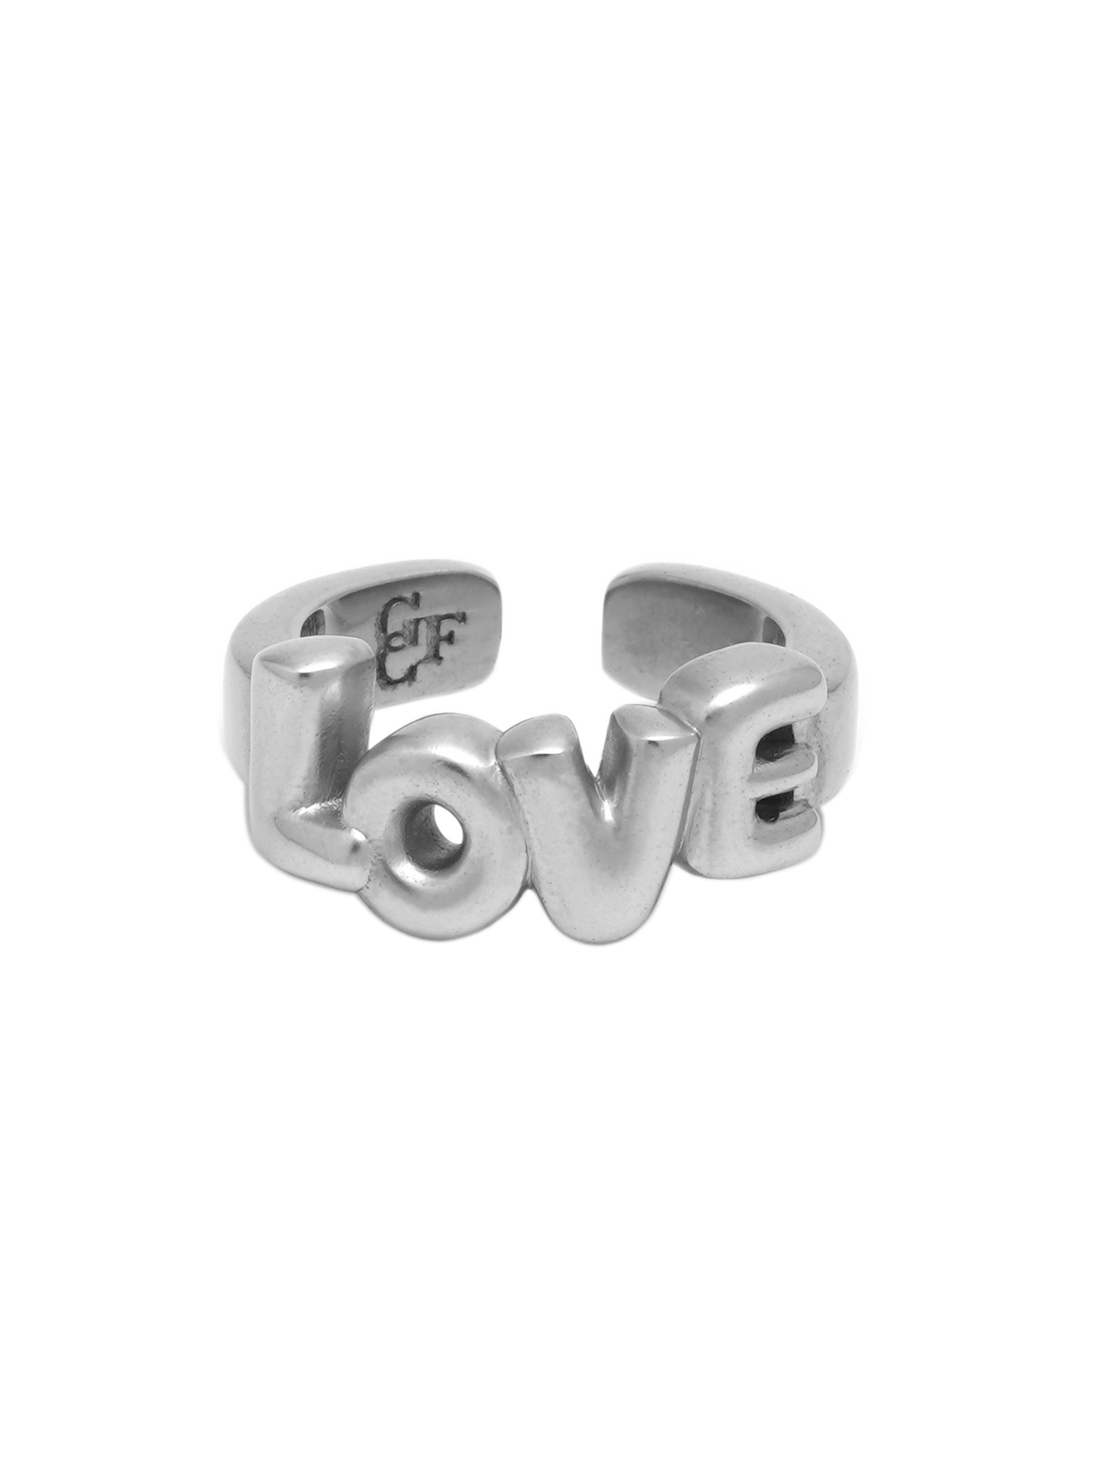 Message ring "Love"